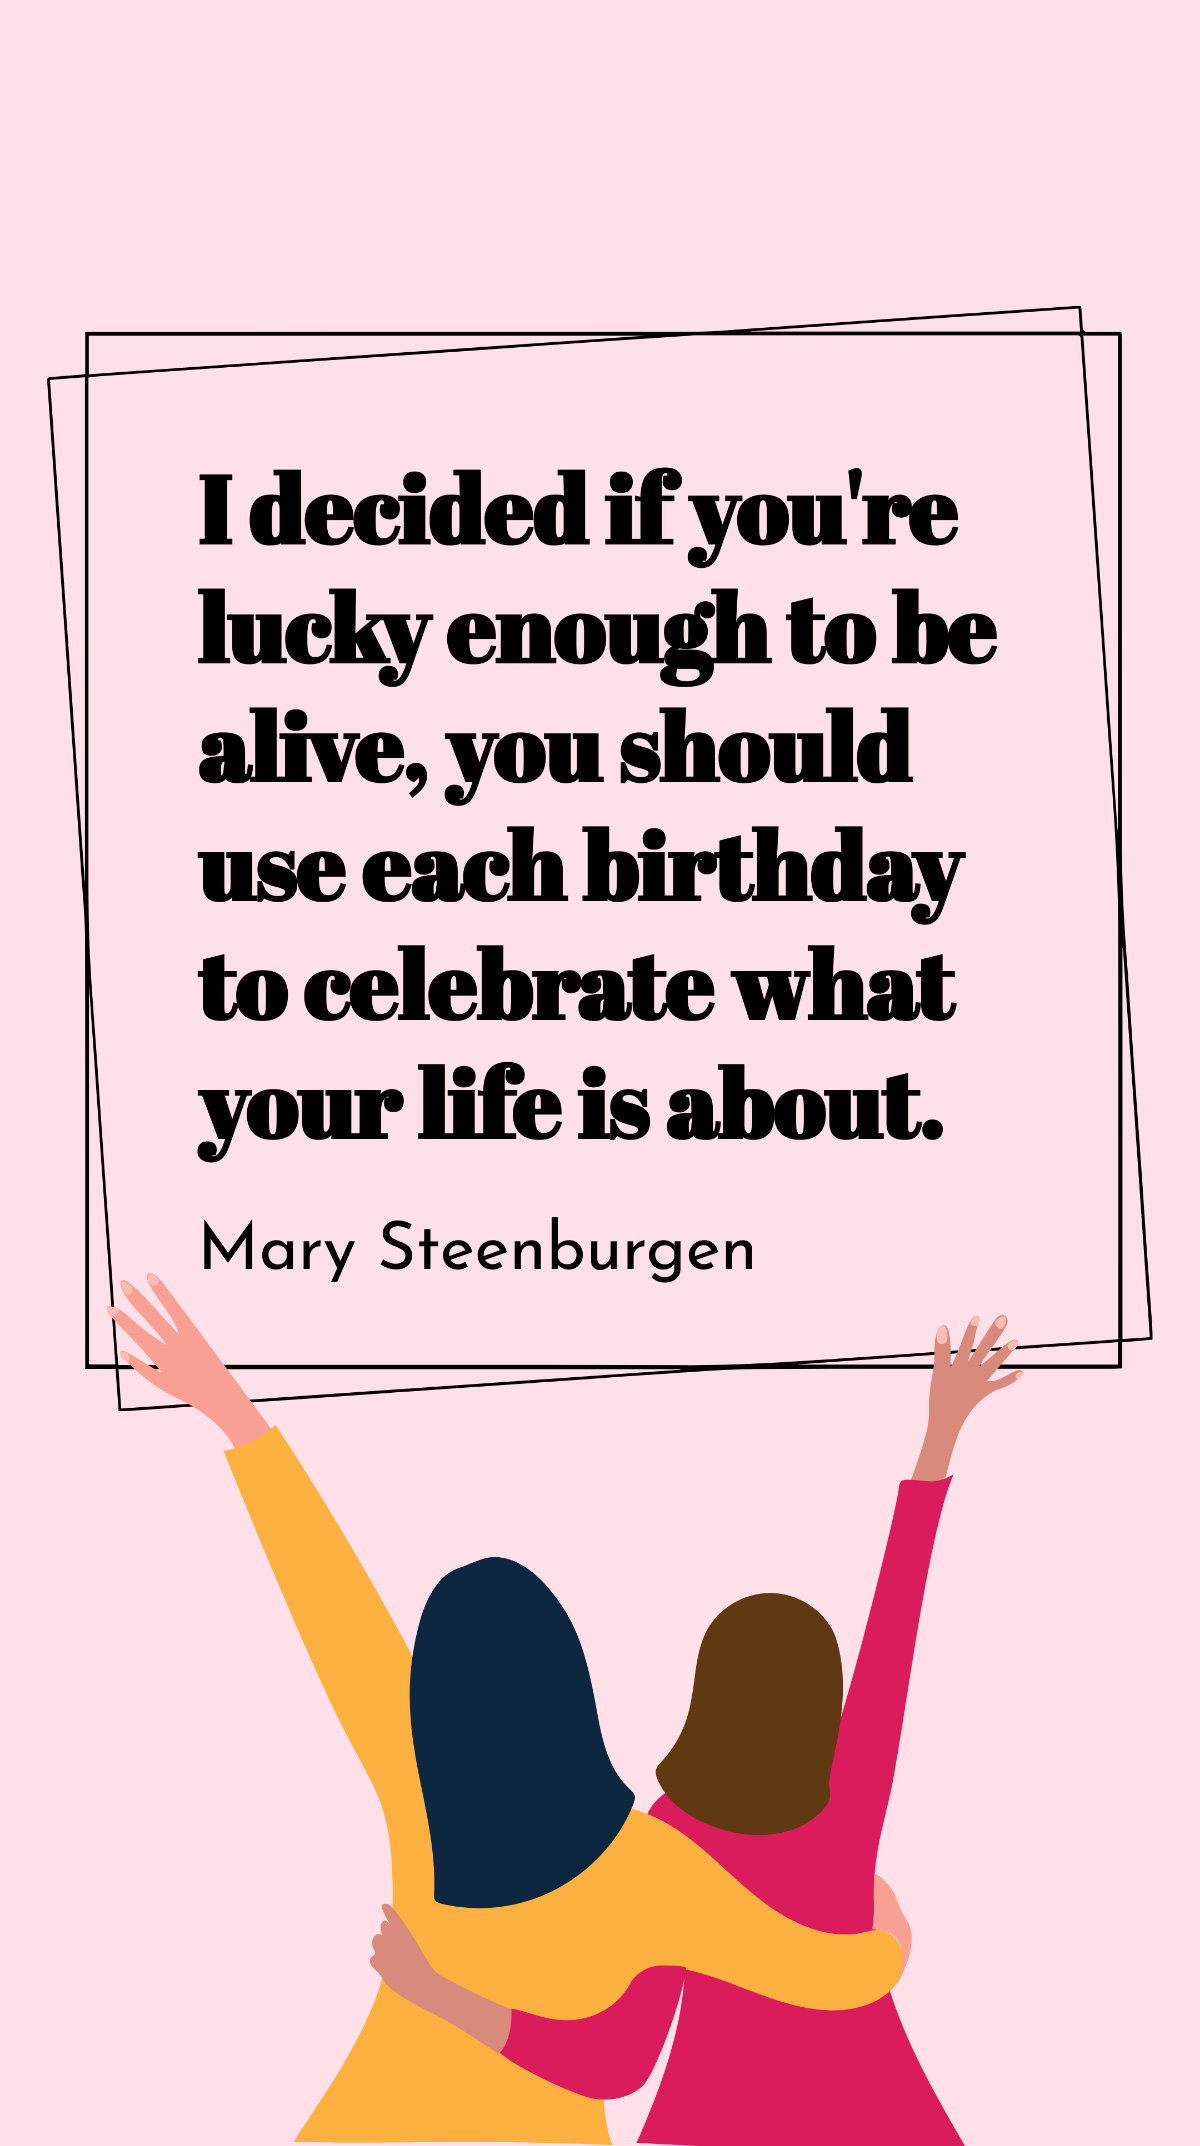 Mary Steenburgen - I decided if you're lucky enough to be alive, you should use each birthday to celebrate what your life is about. Template